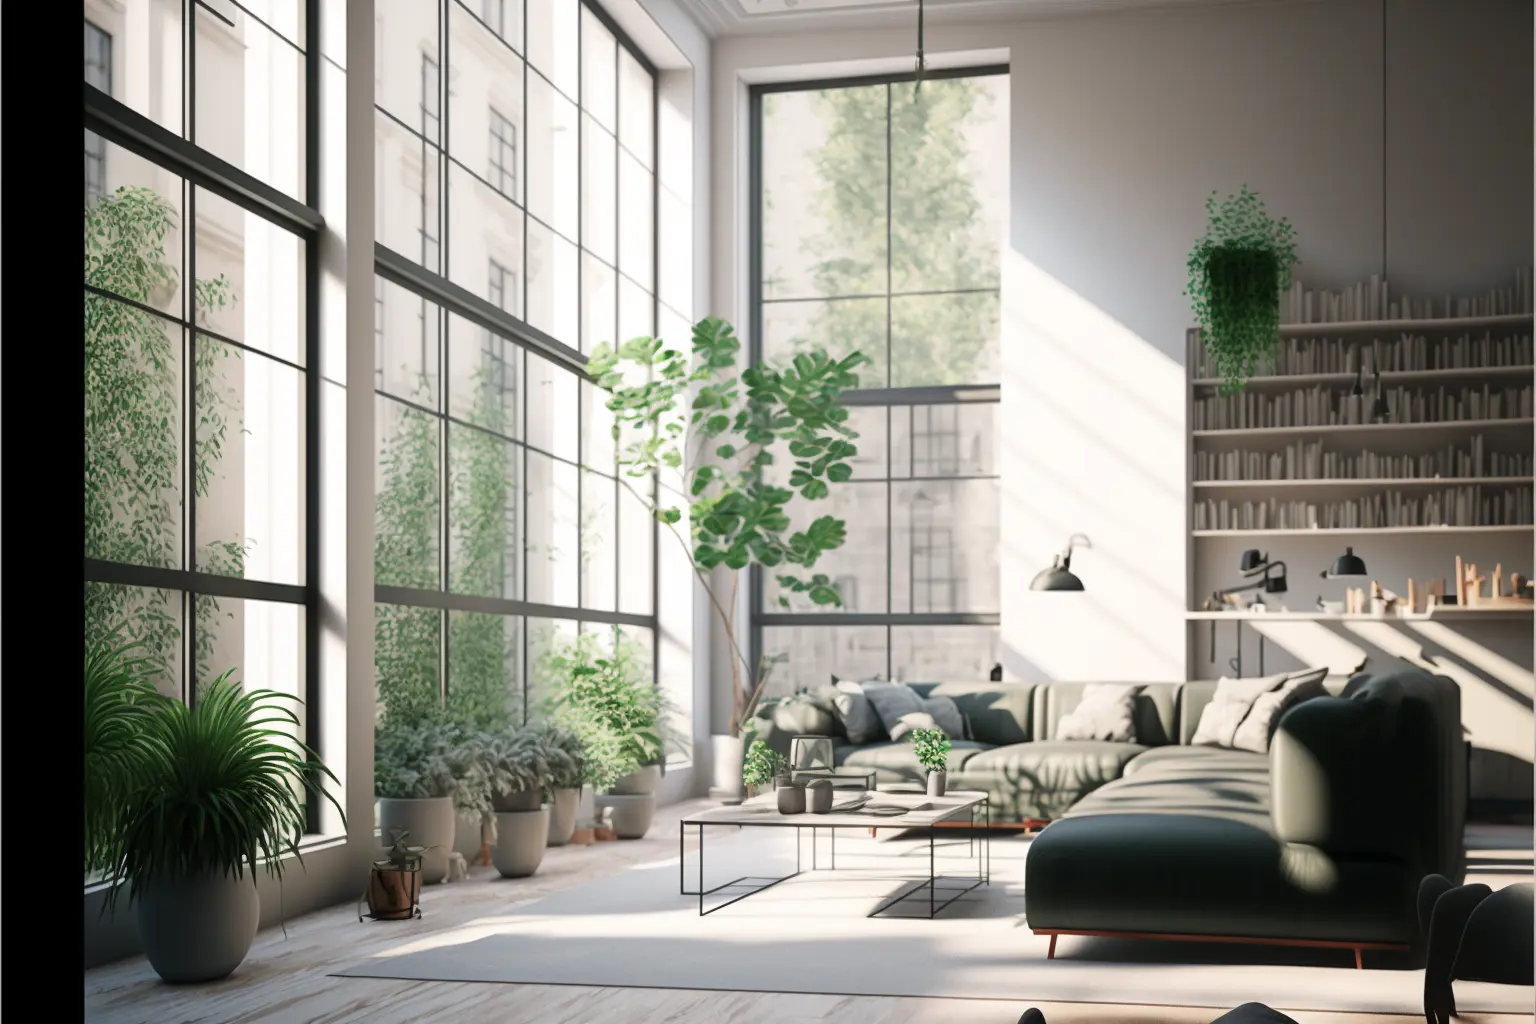 Interior Design, a perspective of of a study, modernist, large windows with natural light, Light colors, plants, modern furniture, modern interior design 